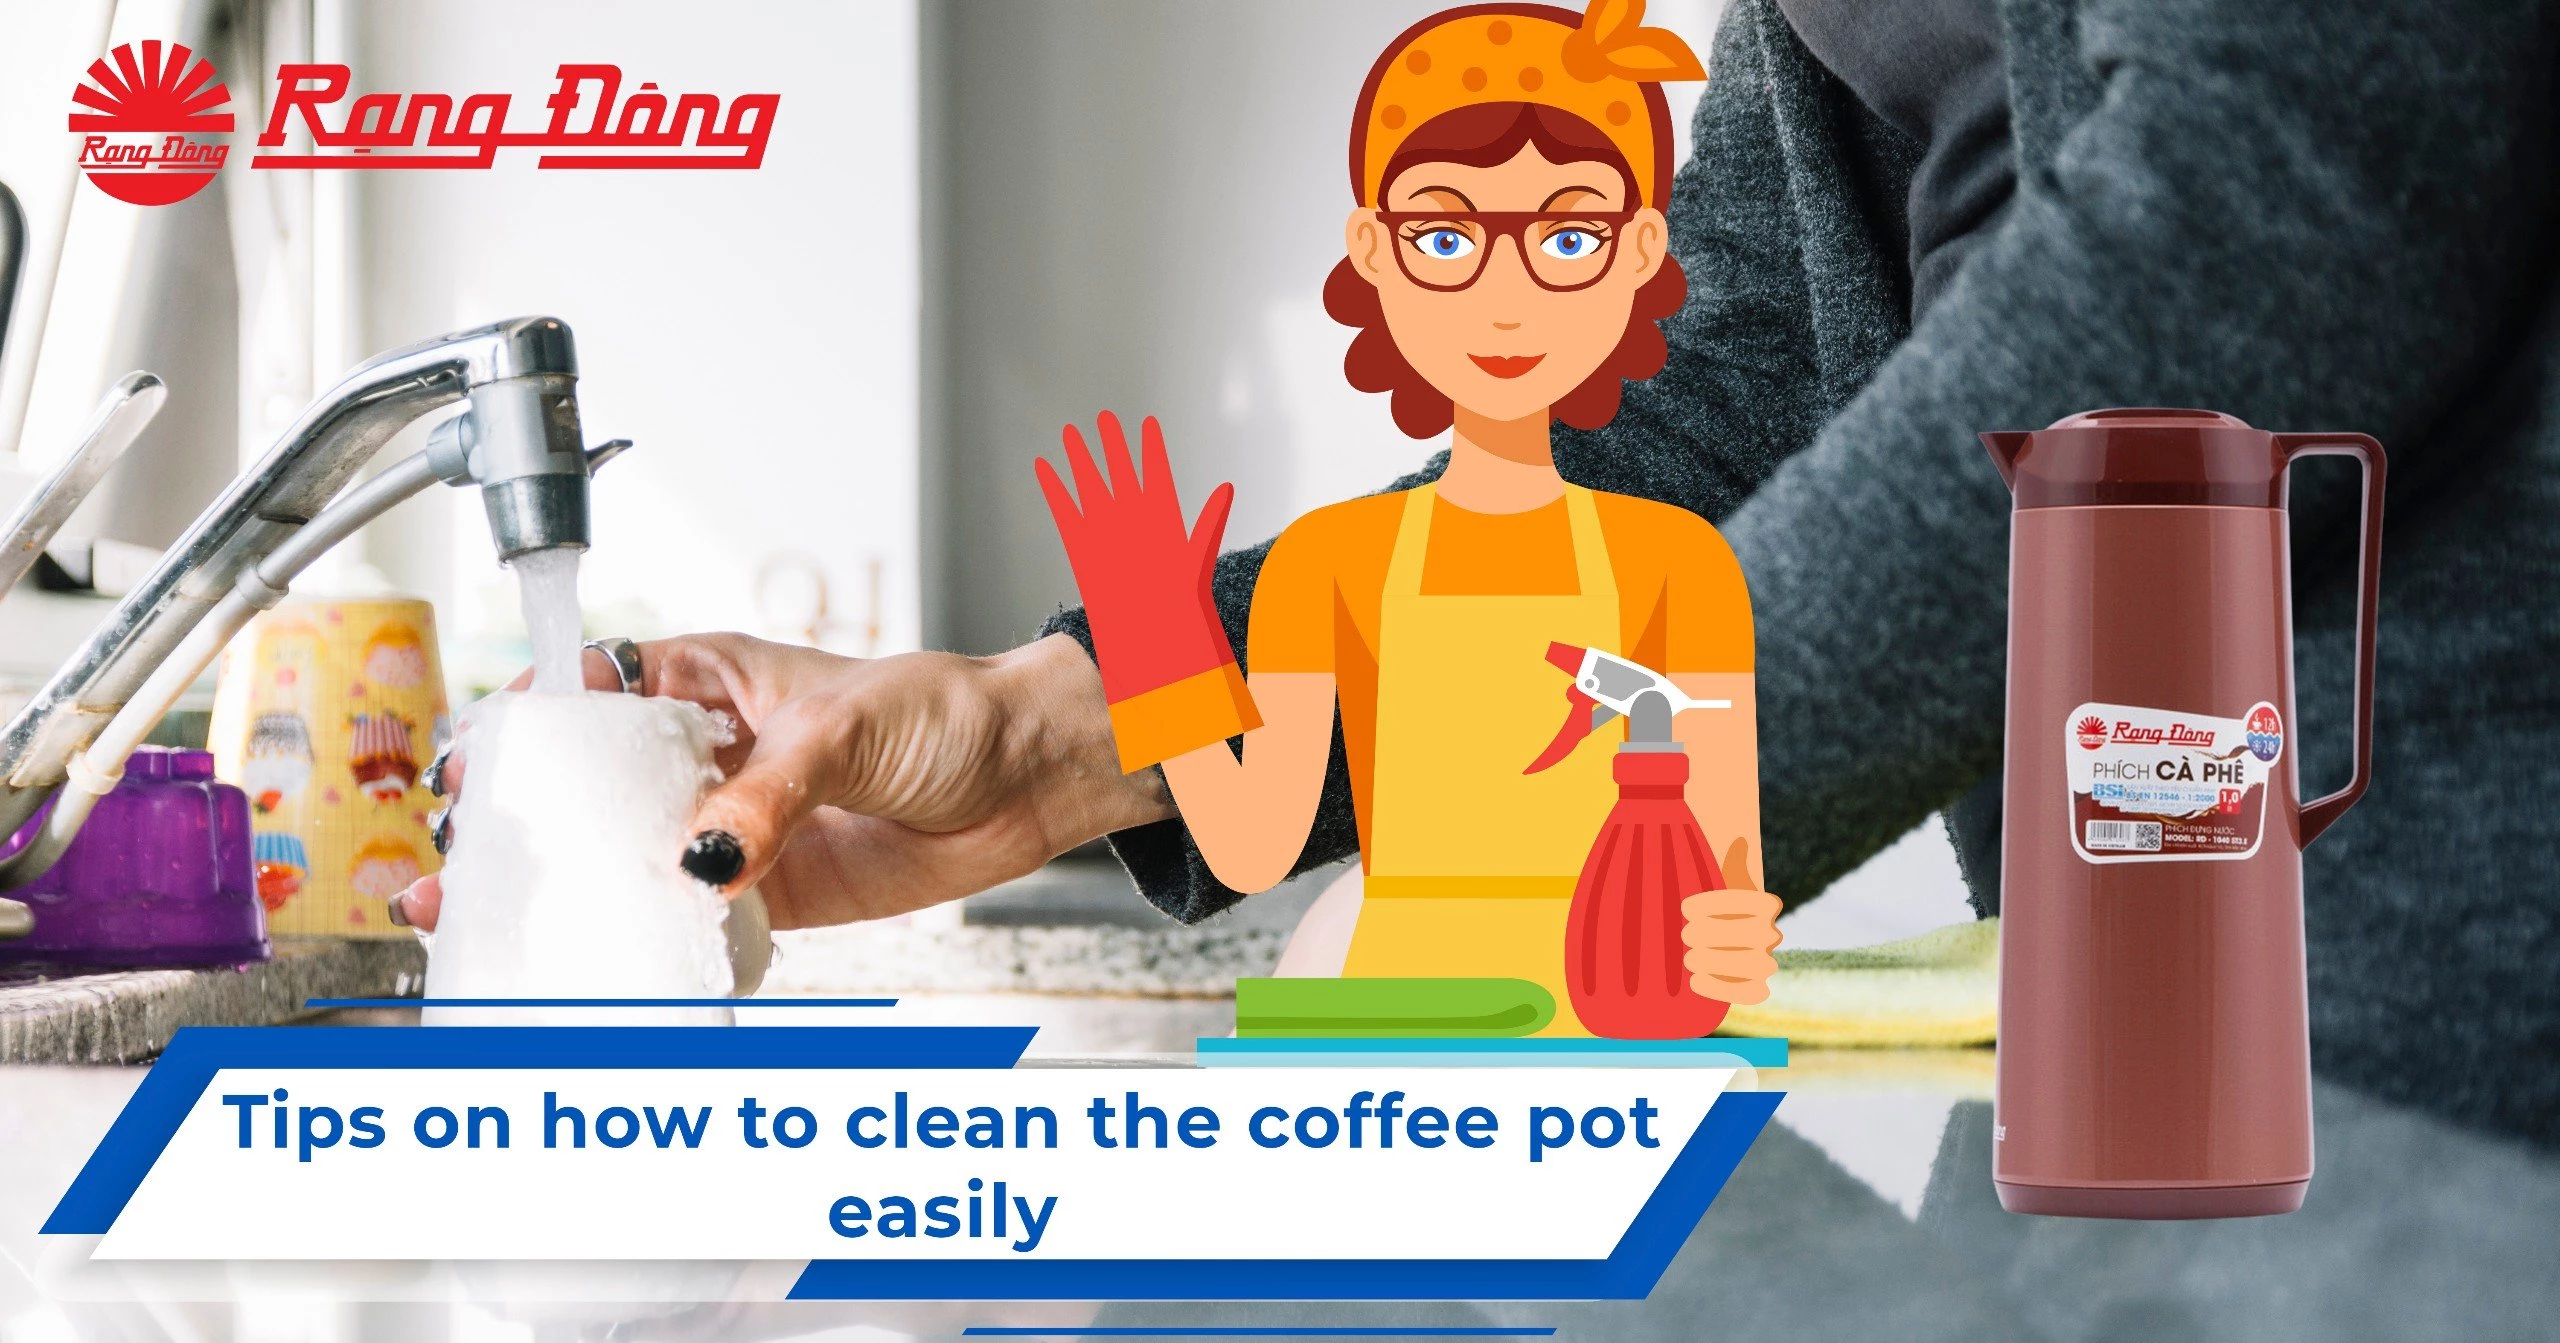 Tips on how to clean the coffee pot easily